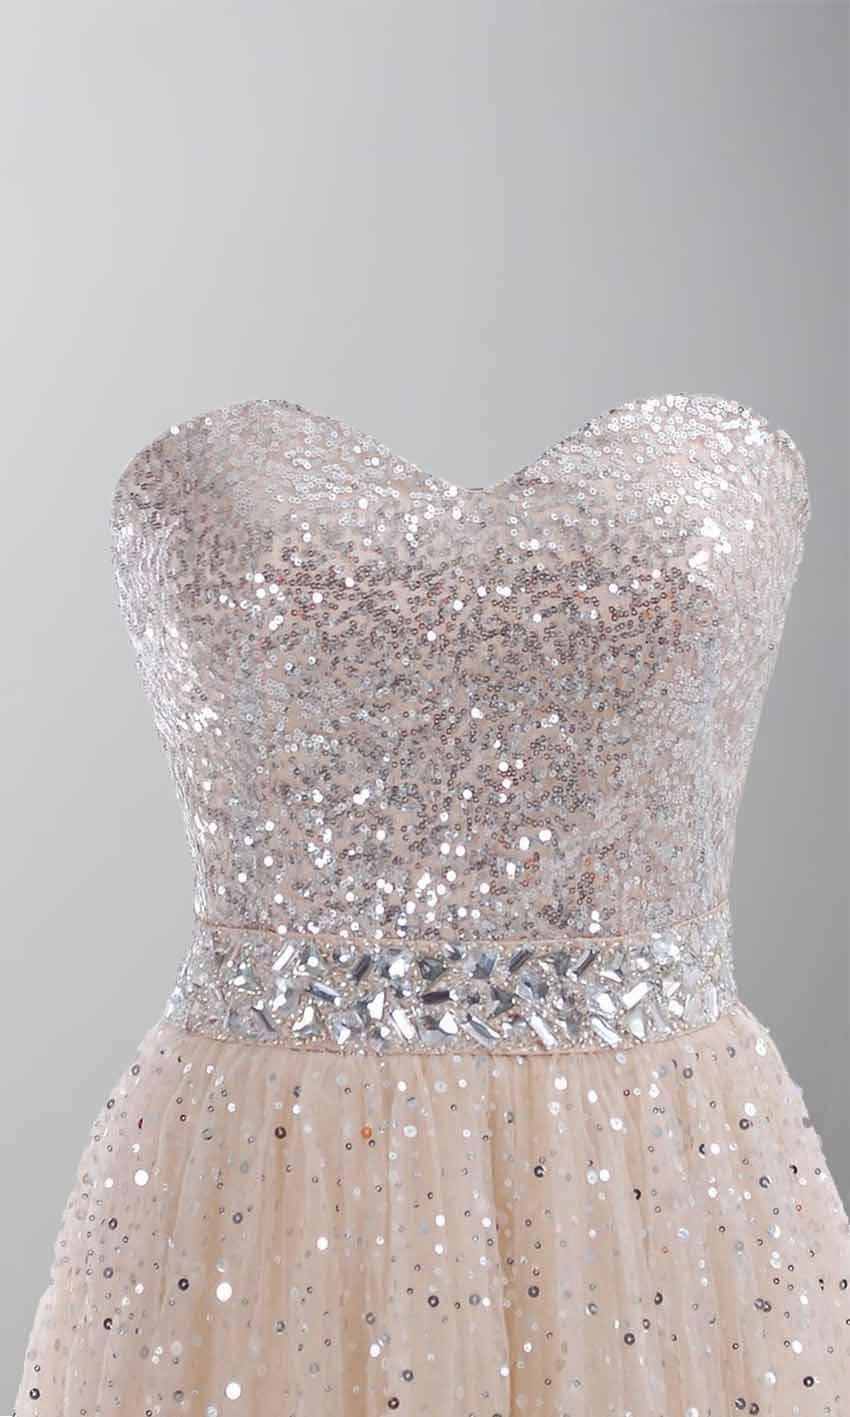 Свадьба - Champagne Sequin Sweetheart Long Prom Gowns KSP254 [KSP254] - £109.00 : Cheap Prom Dresses Uk, Bridesmaid Dresses, 2014 Prom & Evening Dresses, Look for cheap elegant prom dresses 2014, cocktail gowns, or dresses for special occasions? kissprom.co.uk offe